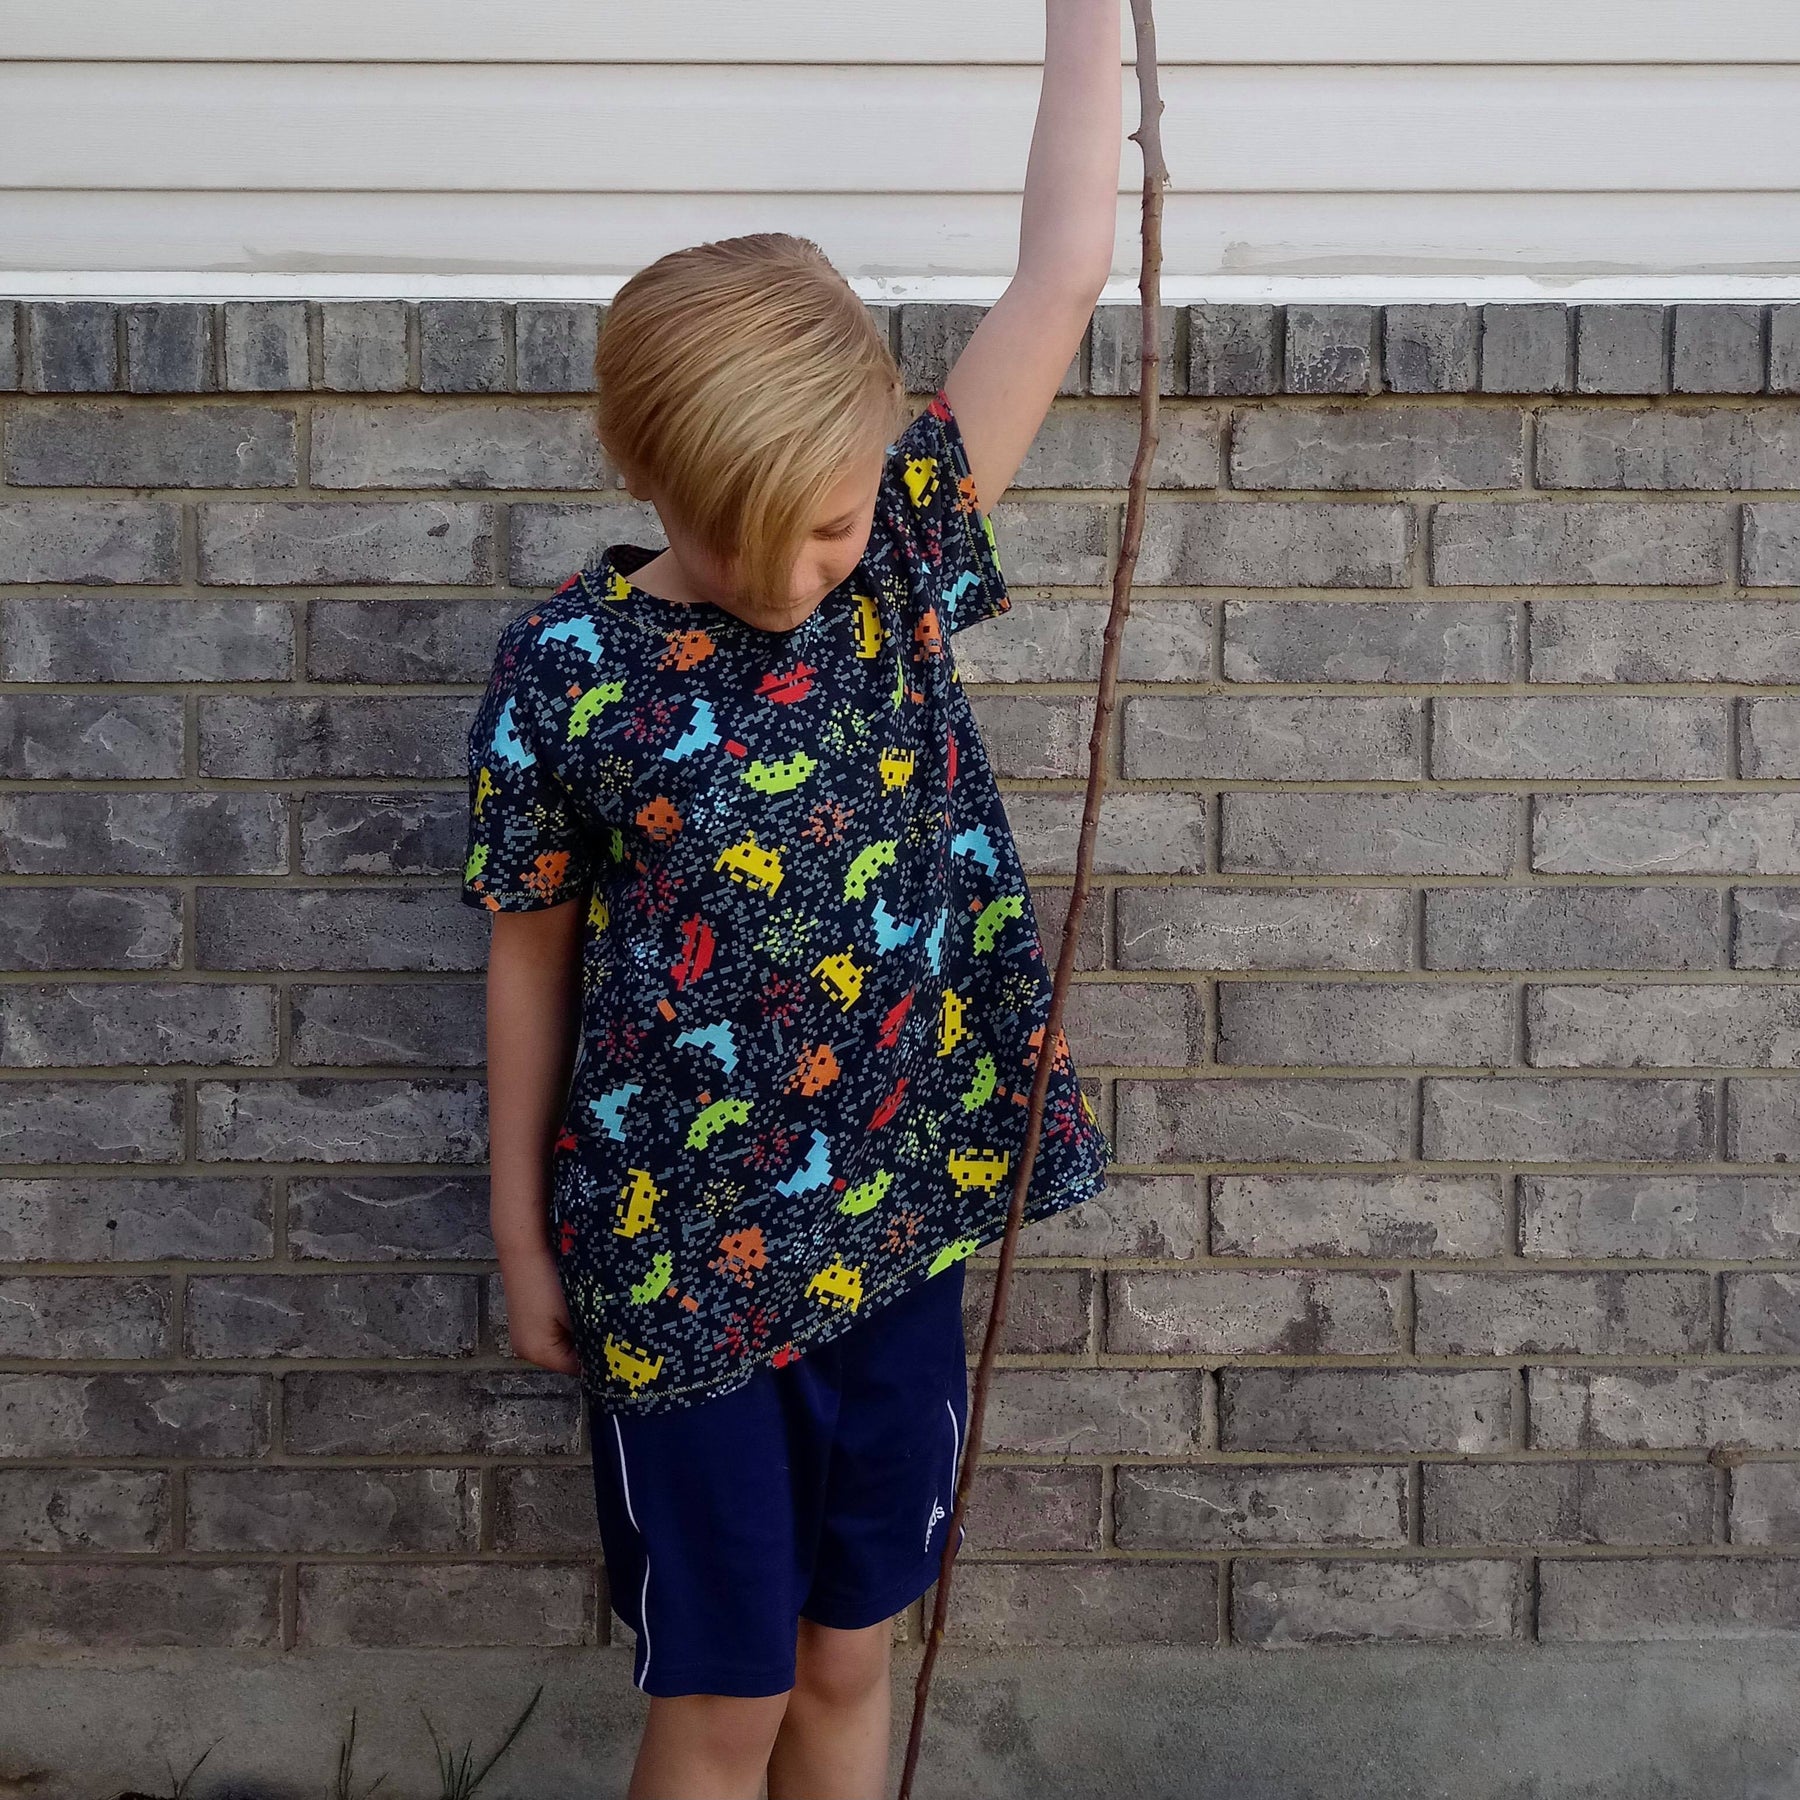 59-1 Wide shirt with shoulder pads #paddedtee – sistermagpatterns